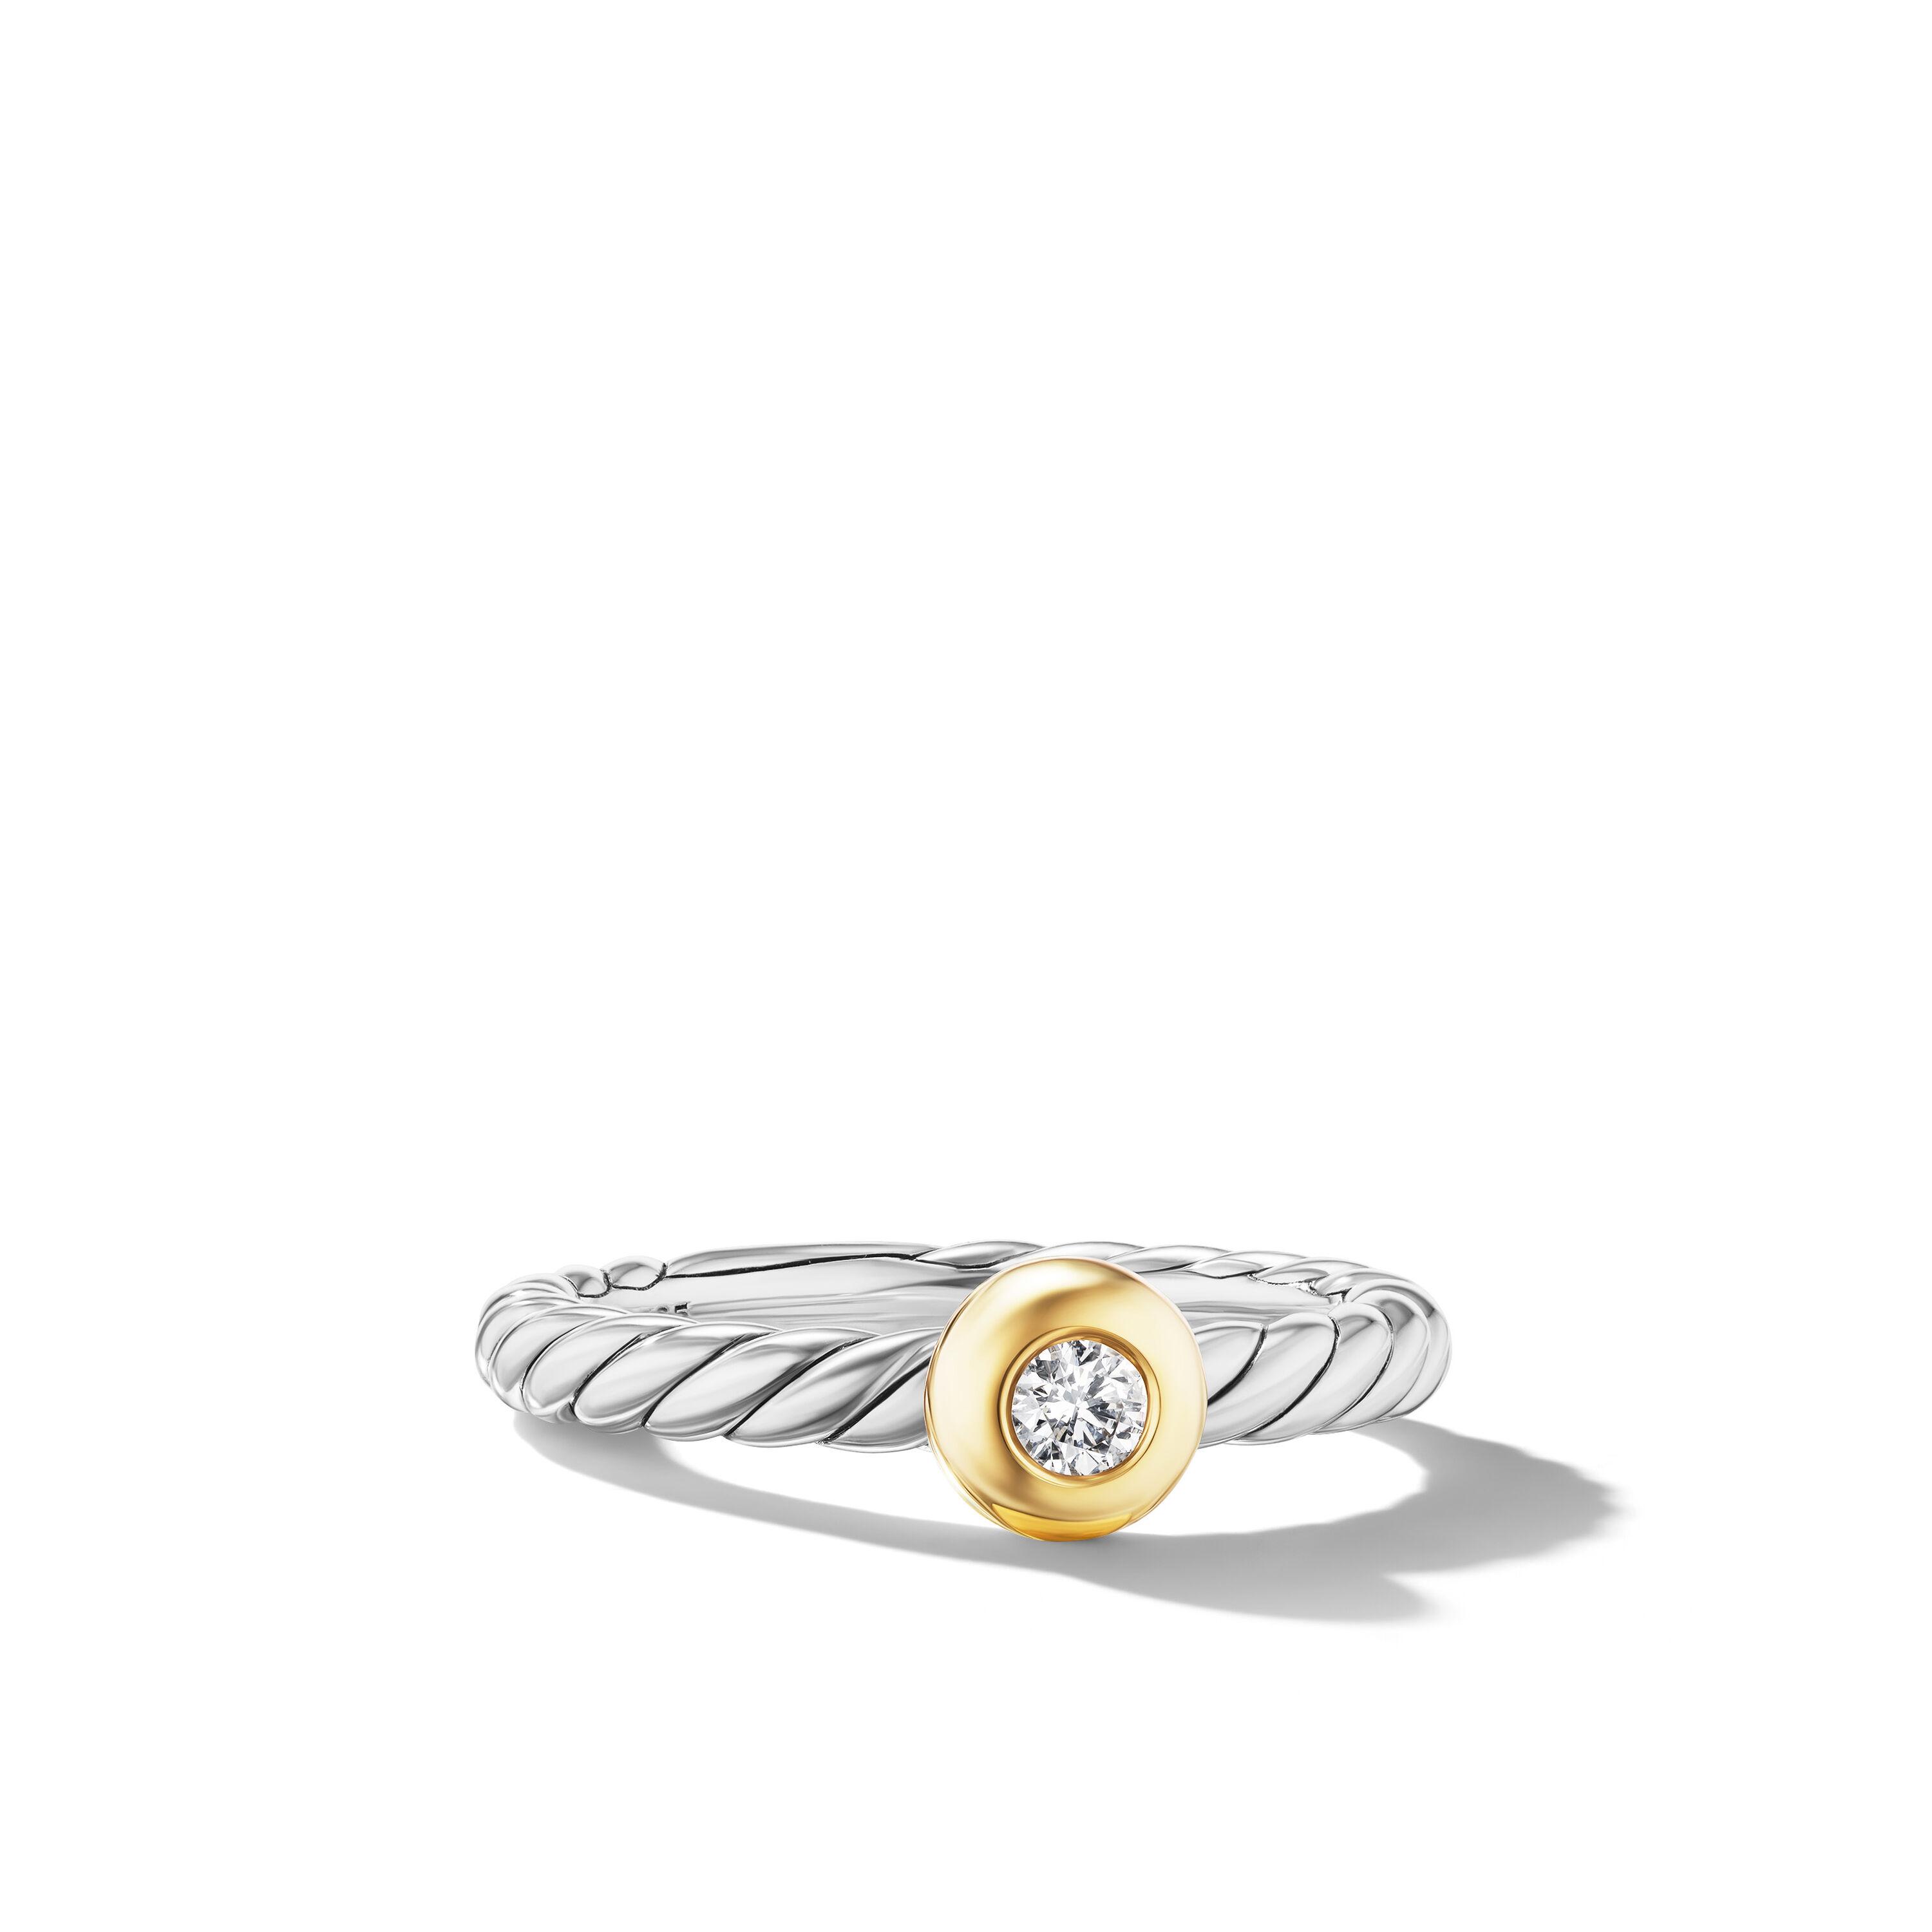 David Yurman Petite Cable Ring in Sterling Silver with 14K Yellow Gold and Diamond, Size 7